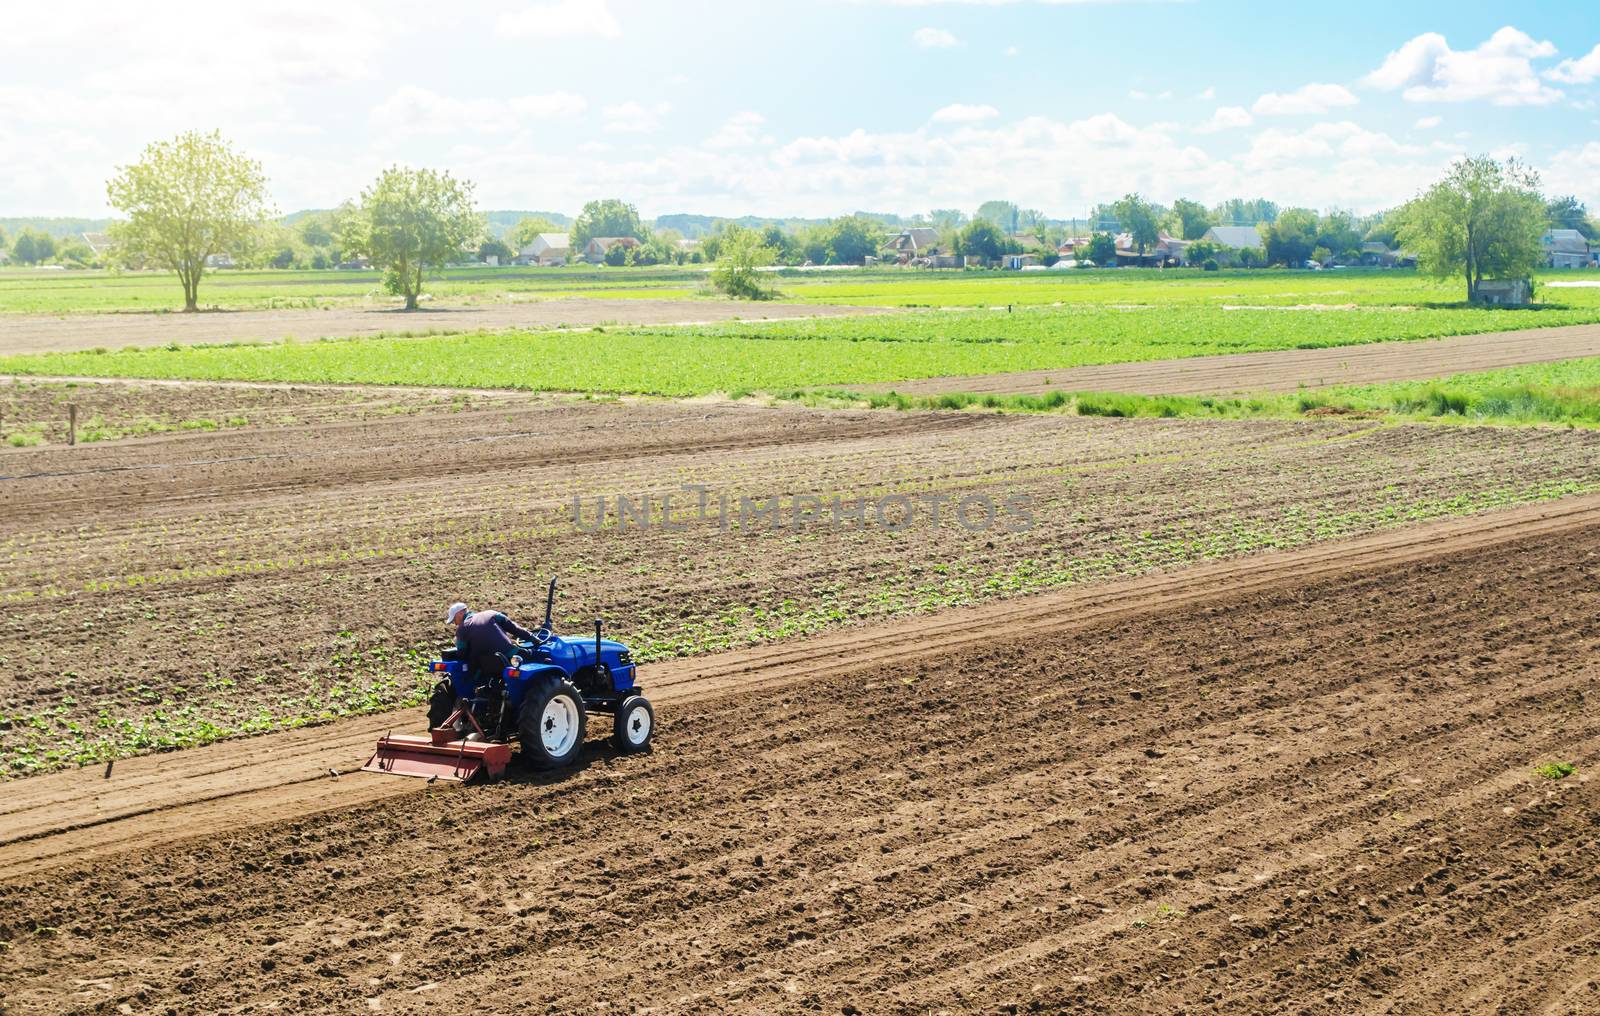 A farmer on a tractor cultivates a farm field. Field preparation for new crop planting. Cultivation equipment. Grinding and loosening soil, removing plants and roots from past harvest. Farm landscape